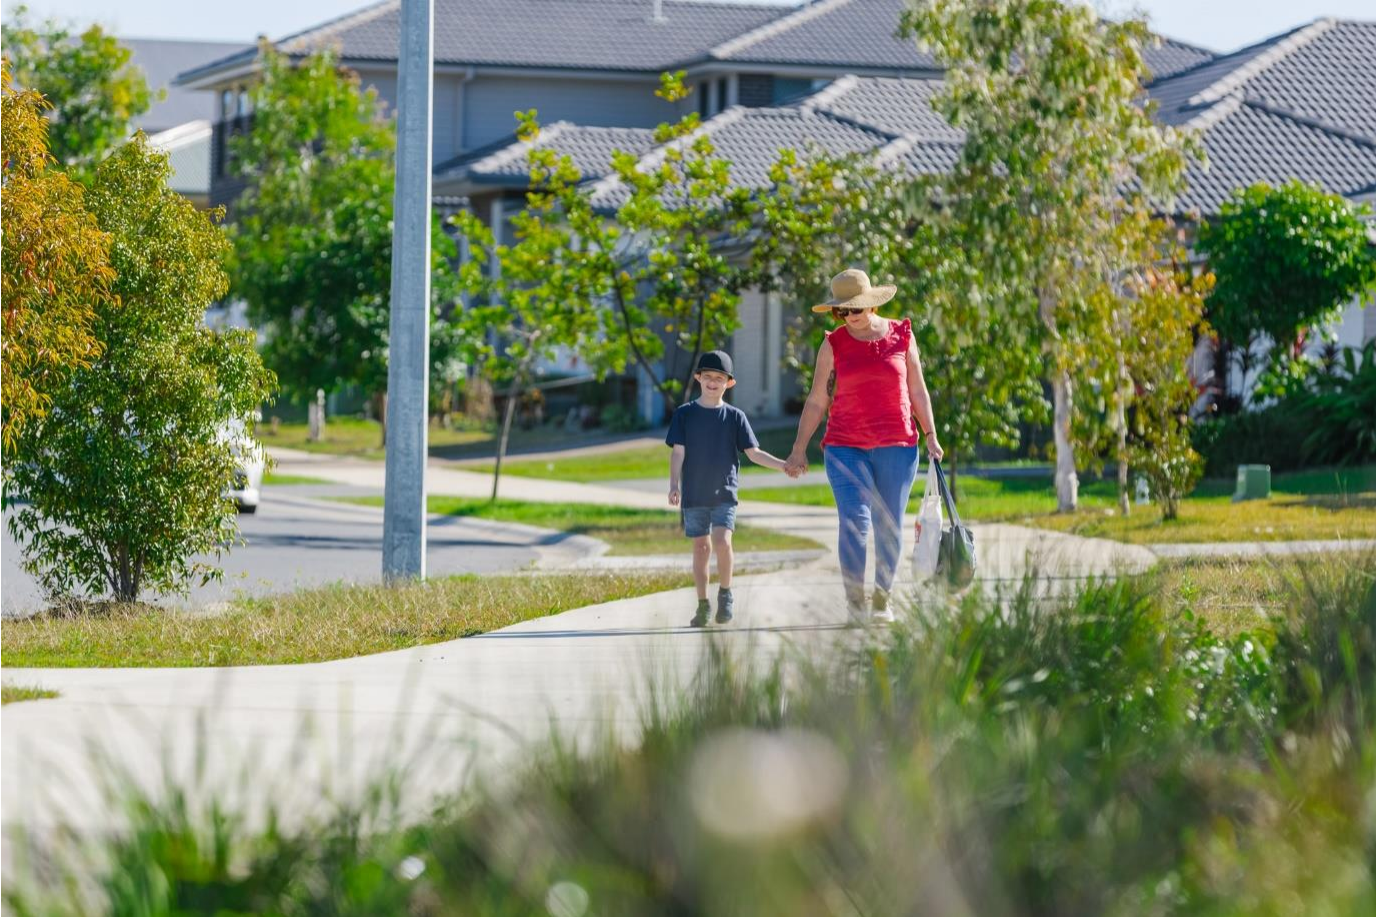 Woman and child walking on footpath with houses in background